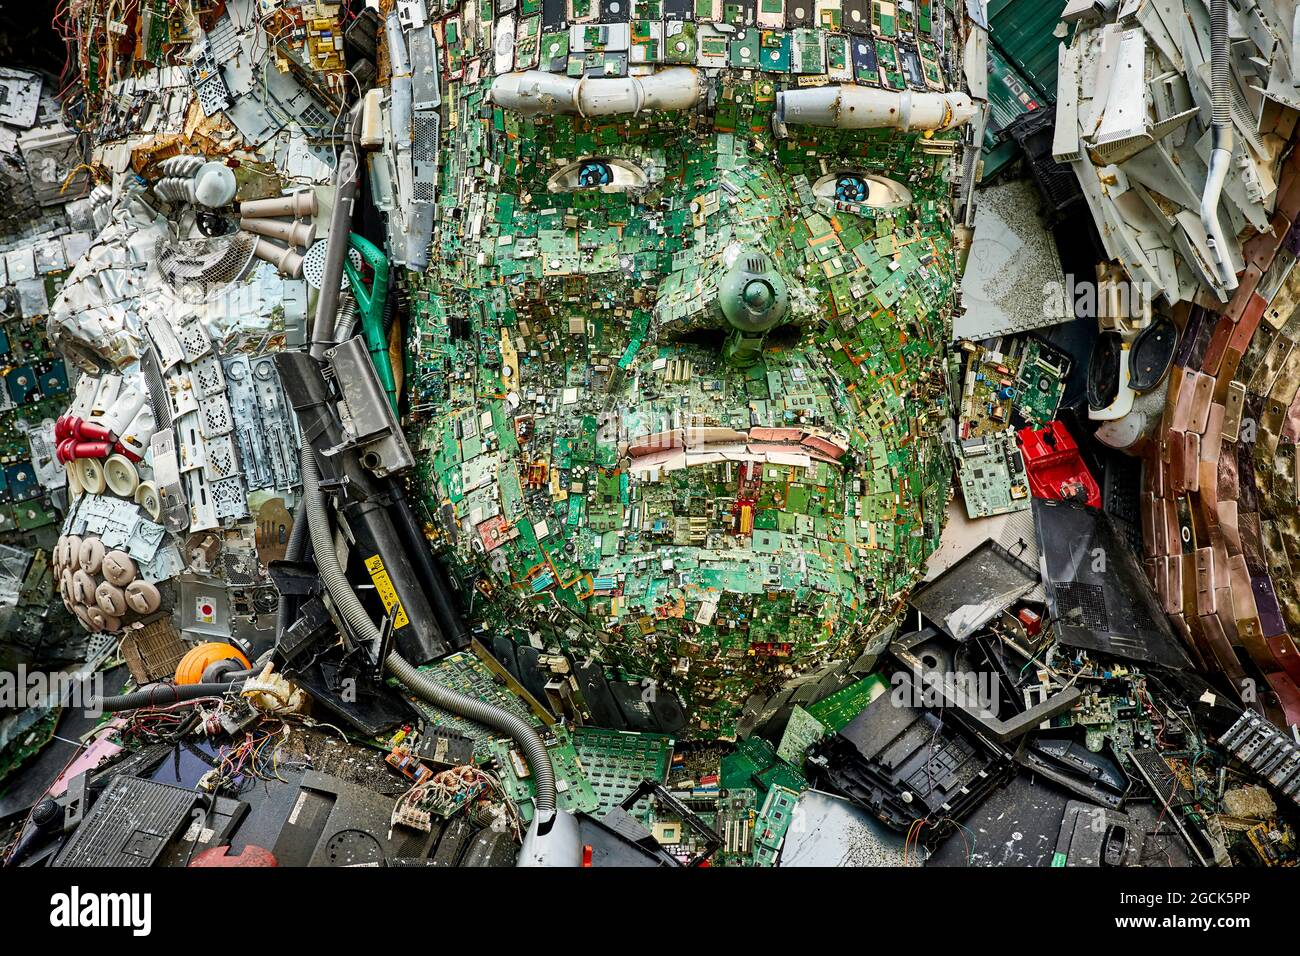 Stockport MusicMagpie giant Mount Rushmore style sculpture G7 leaders head's made entirely of discarded electronics Angela Merkel Joe Biden Stock Photo